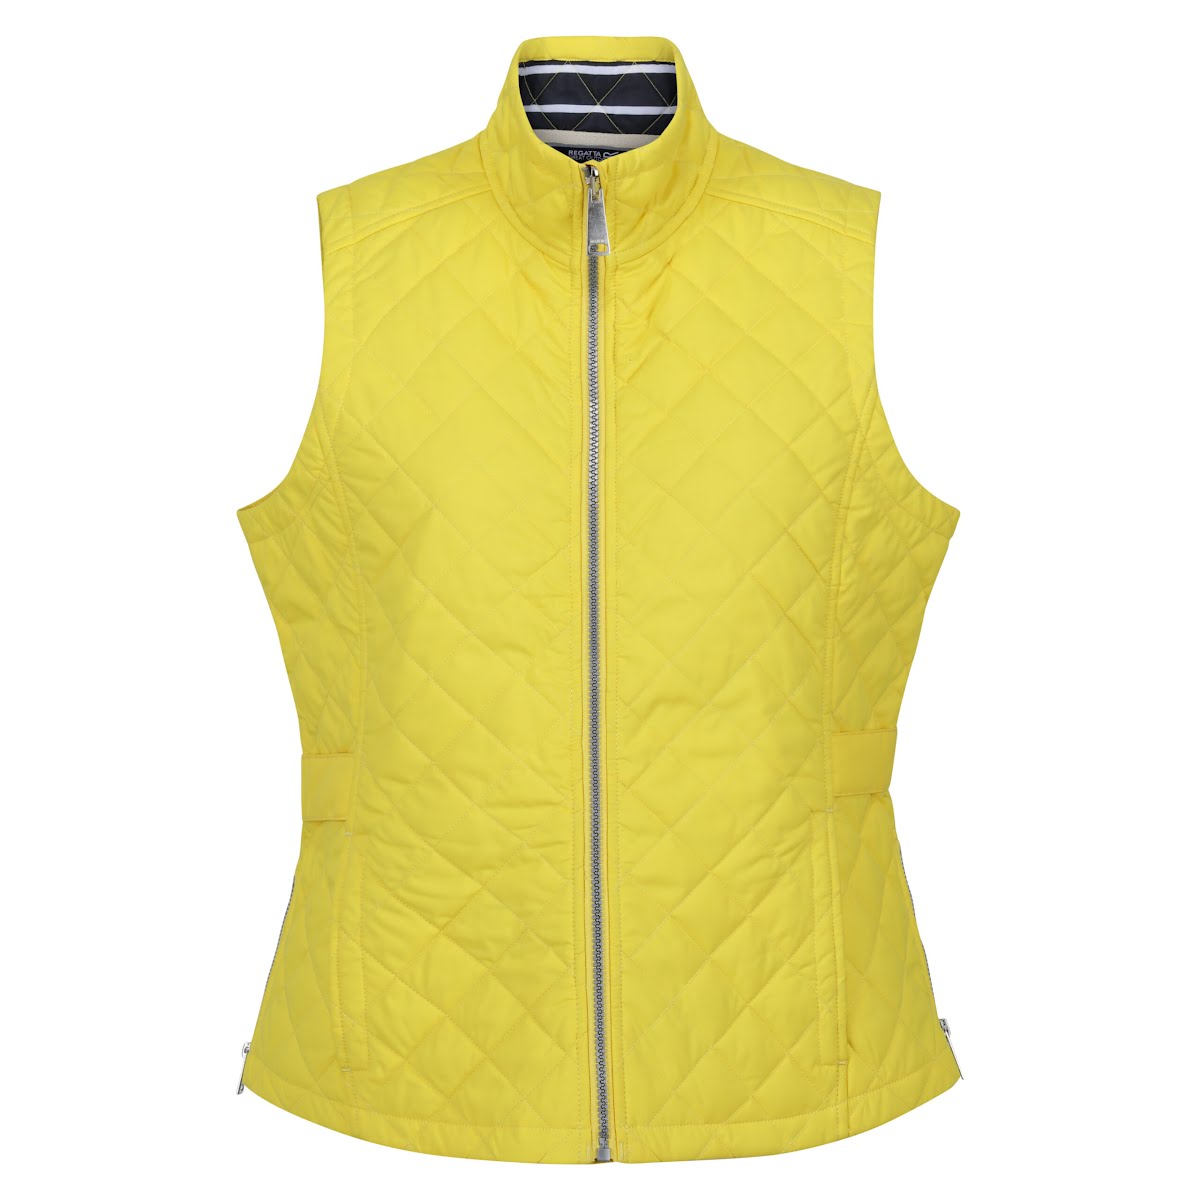 Carmine Quilted Gilet in Maize Yellow, €70